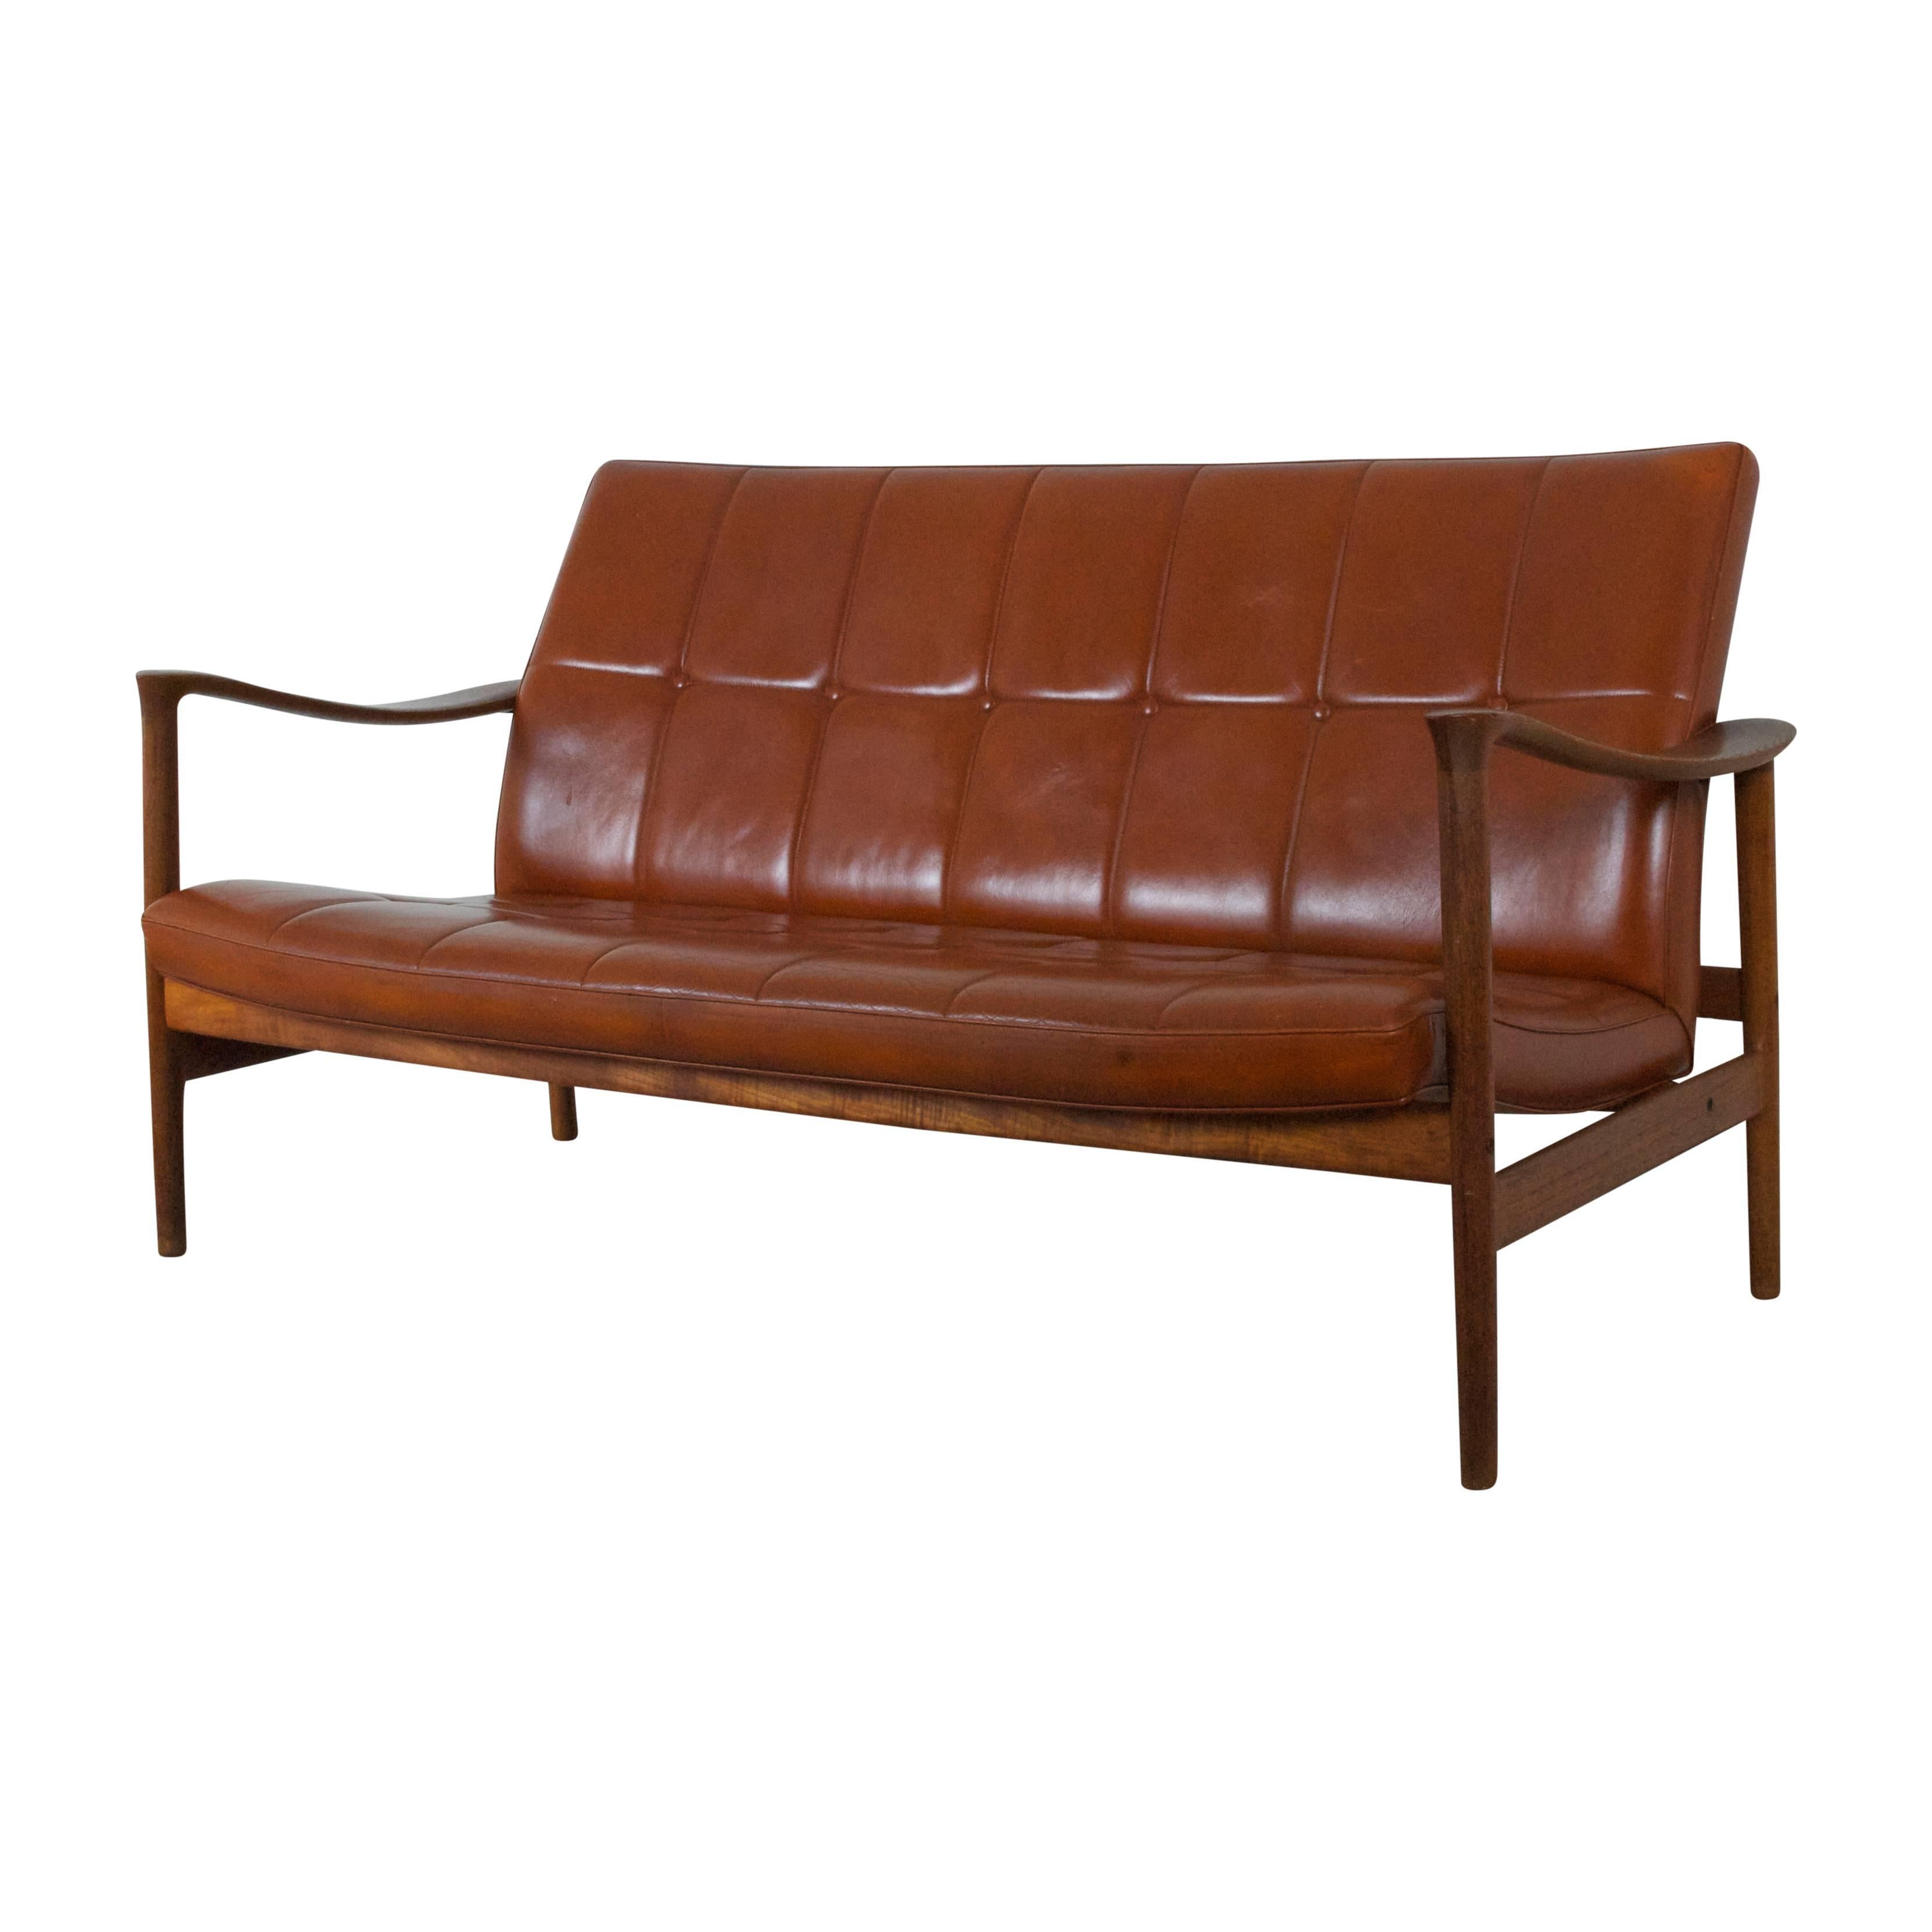 Torbjørn Afdal with Bruksbo design Office two seater settee Model Winston for Nesjestranda Norway 1963. Teak frame and cognac colored leather seat with buttons. 
